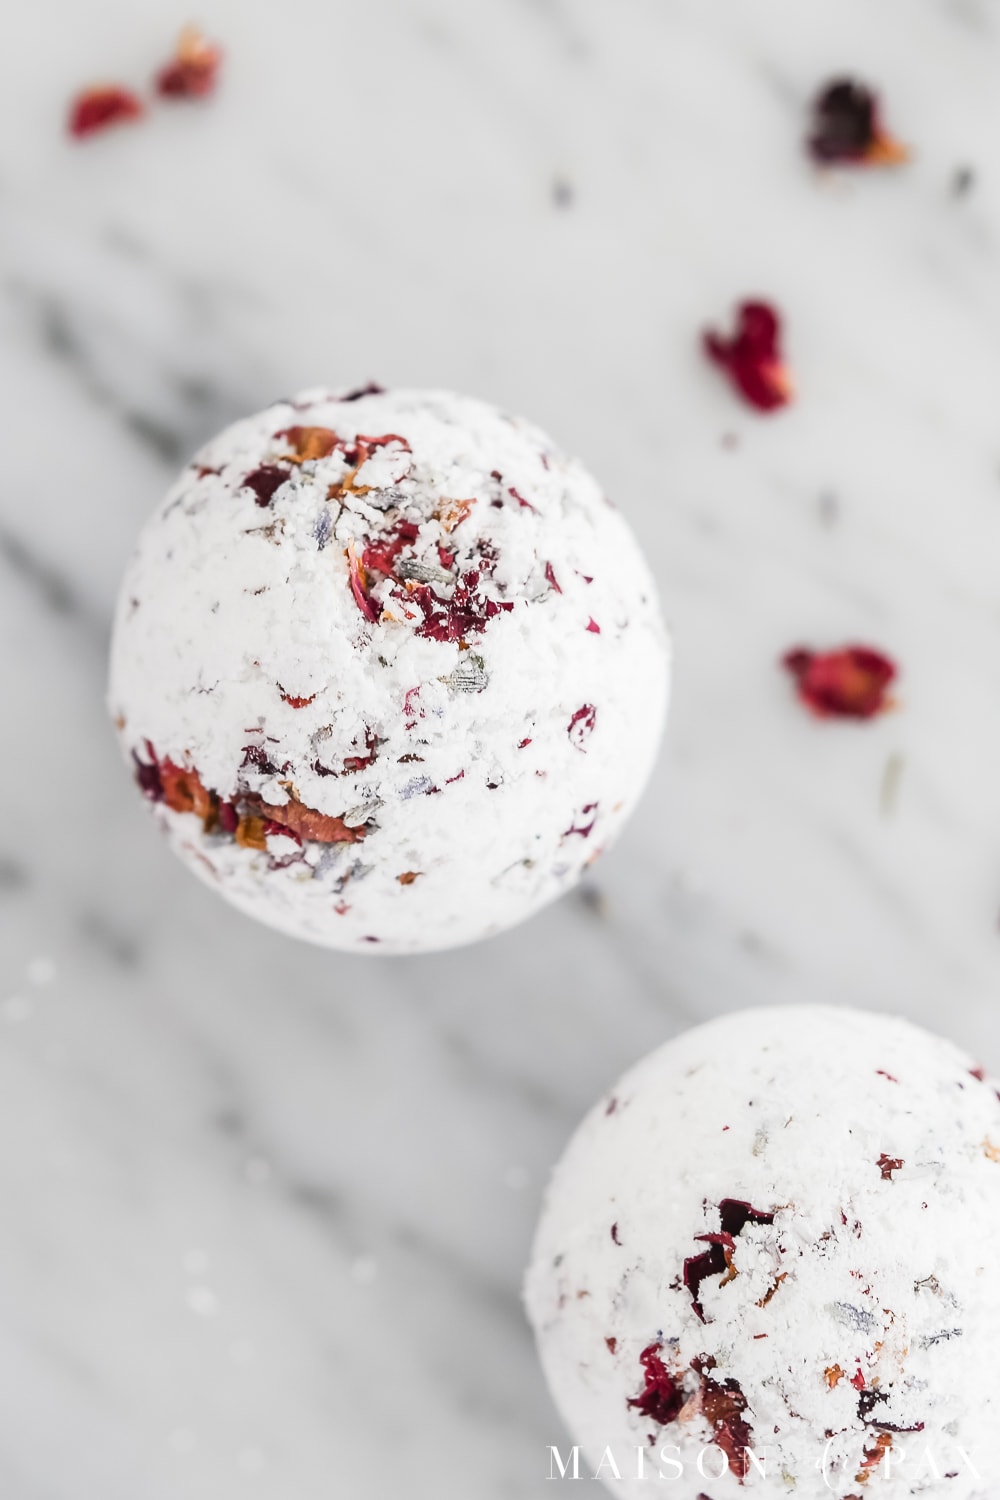 diy bath bombs with real dried lavender and rose petals- Maison de Pax